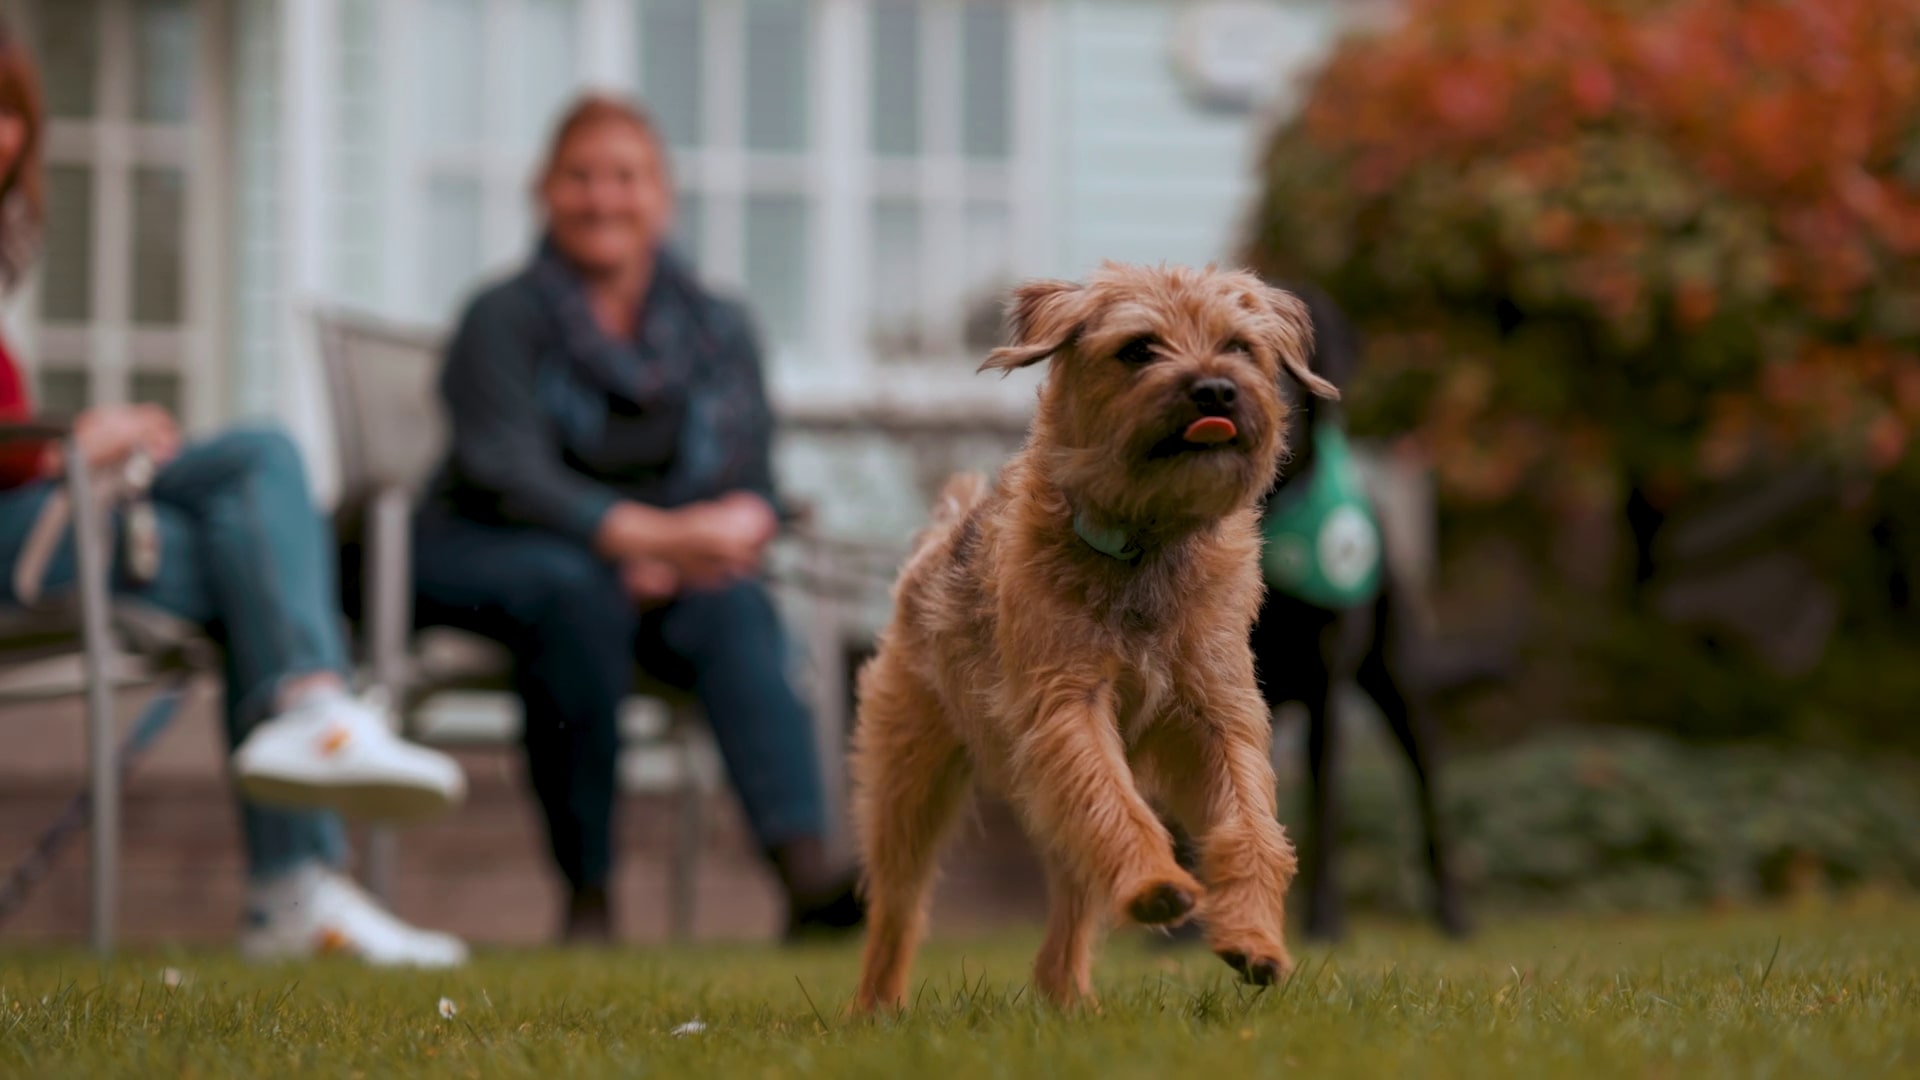 Dog owners are ‘happier’ than those without a four-legged companion, according to a report. (Jon Mills/Zenger)